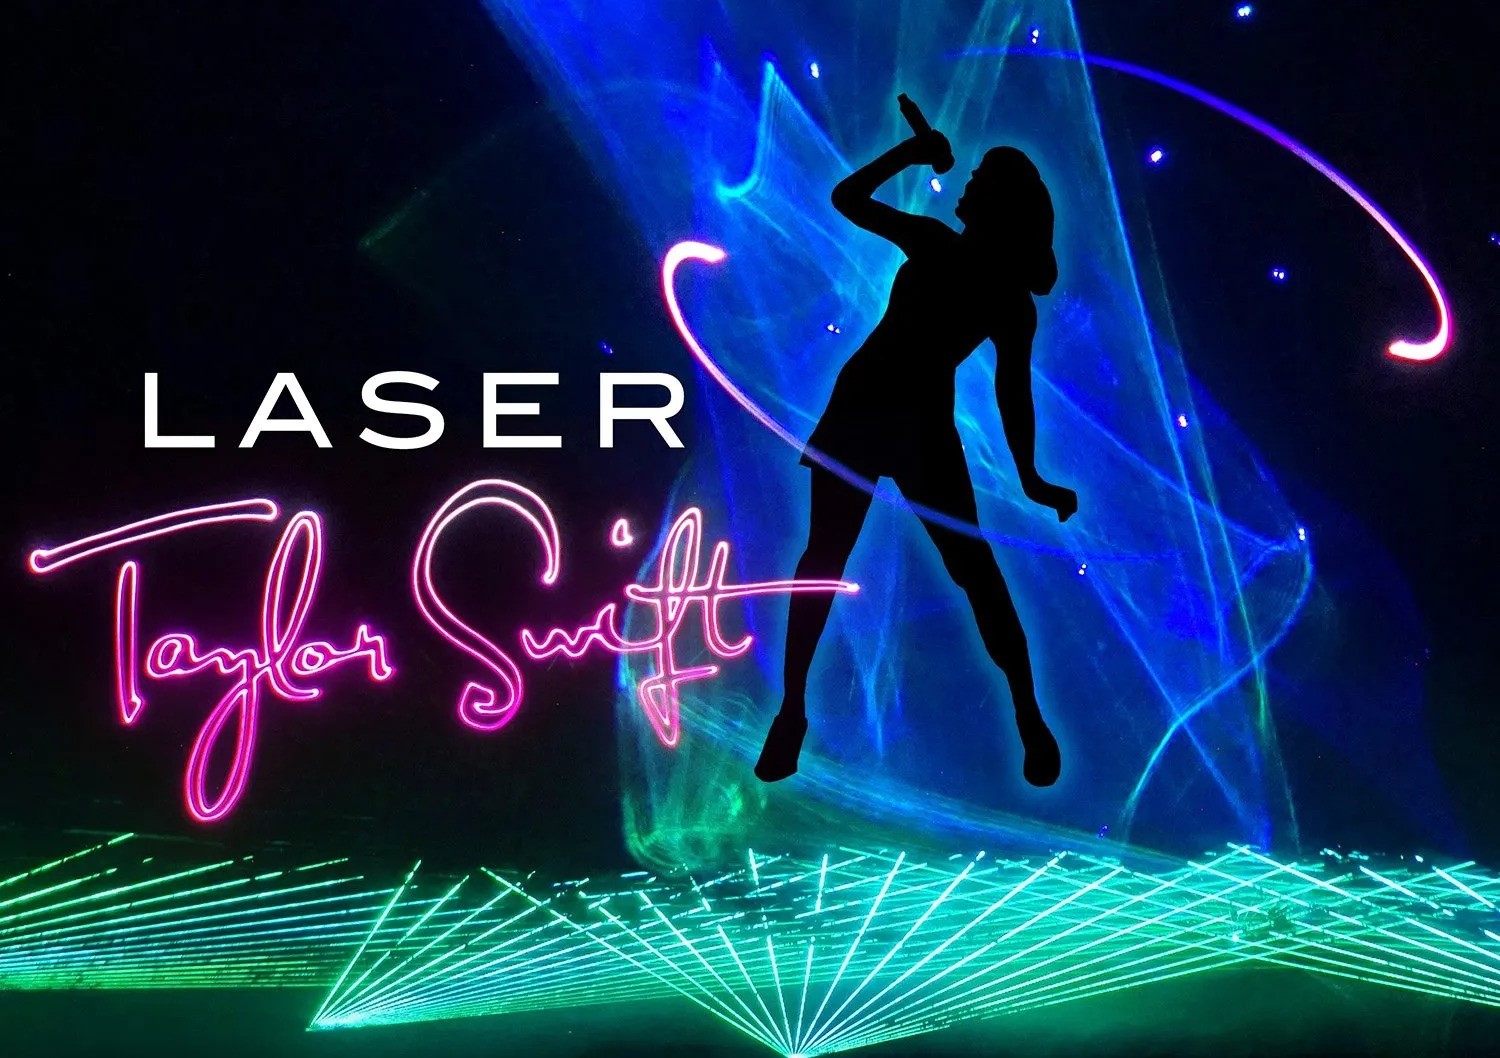 A graphic image of a silhouette of Taylor Swift, signing into a microphone, as blue and green lasers swirl around her.